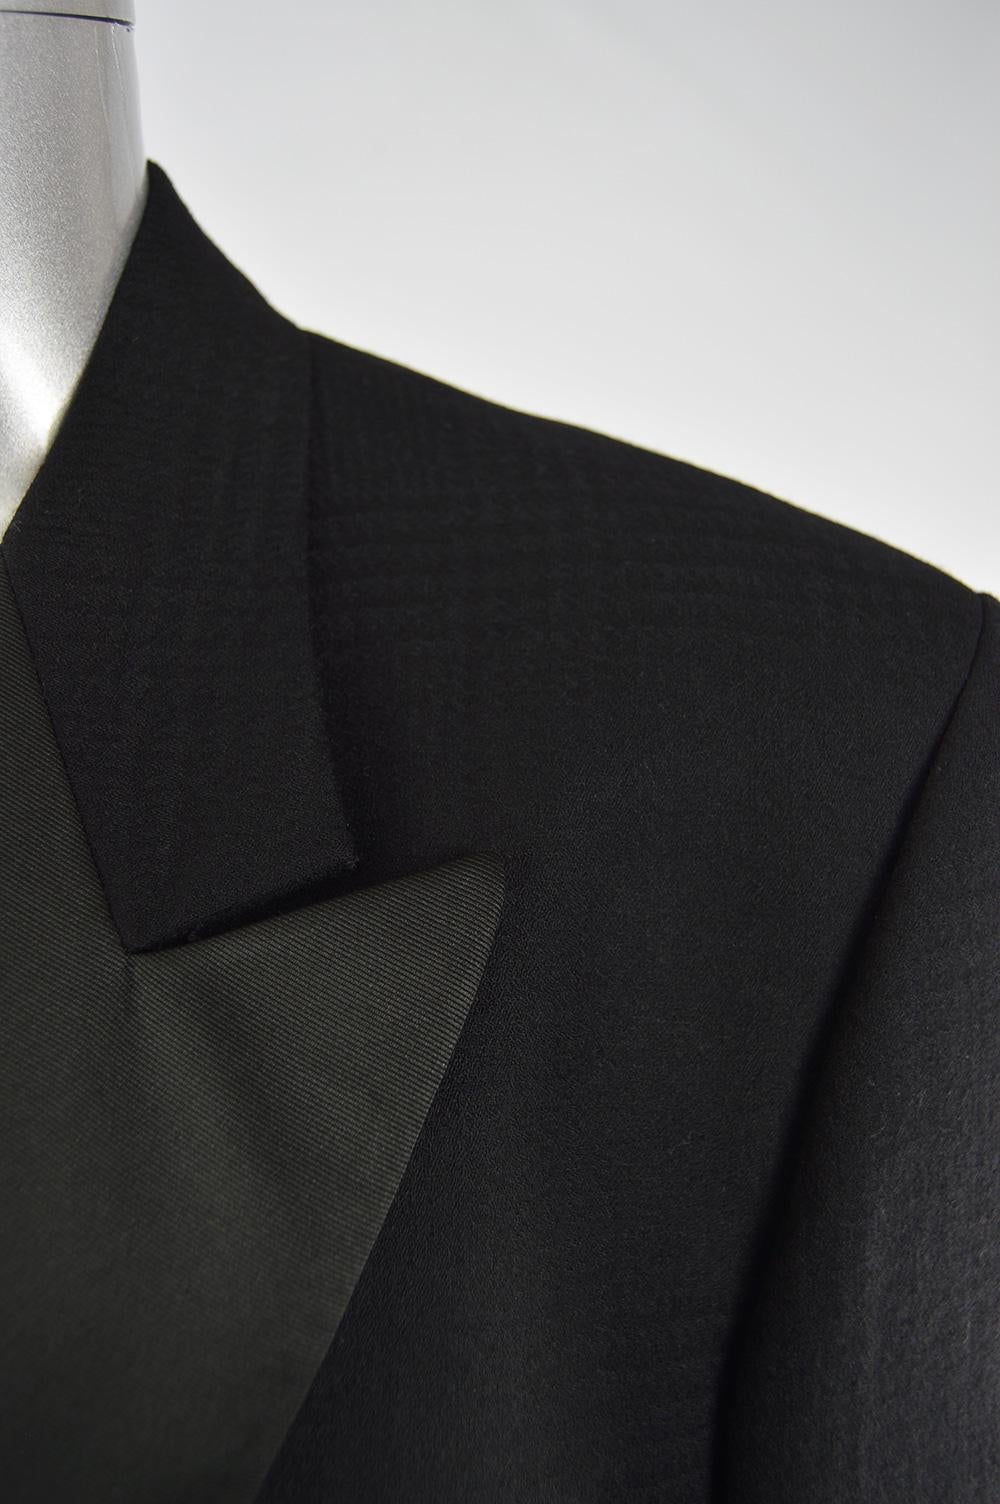 Valentino Men's 1980s Vintage Black Double Breasted Formal Tuxedo Suit ...